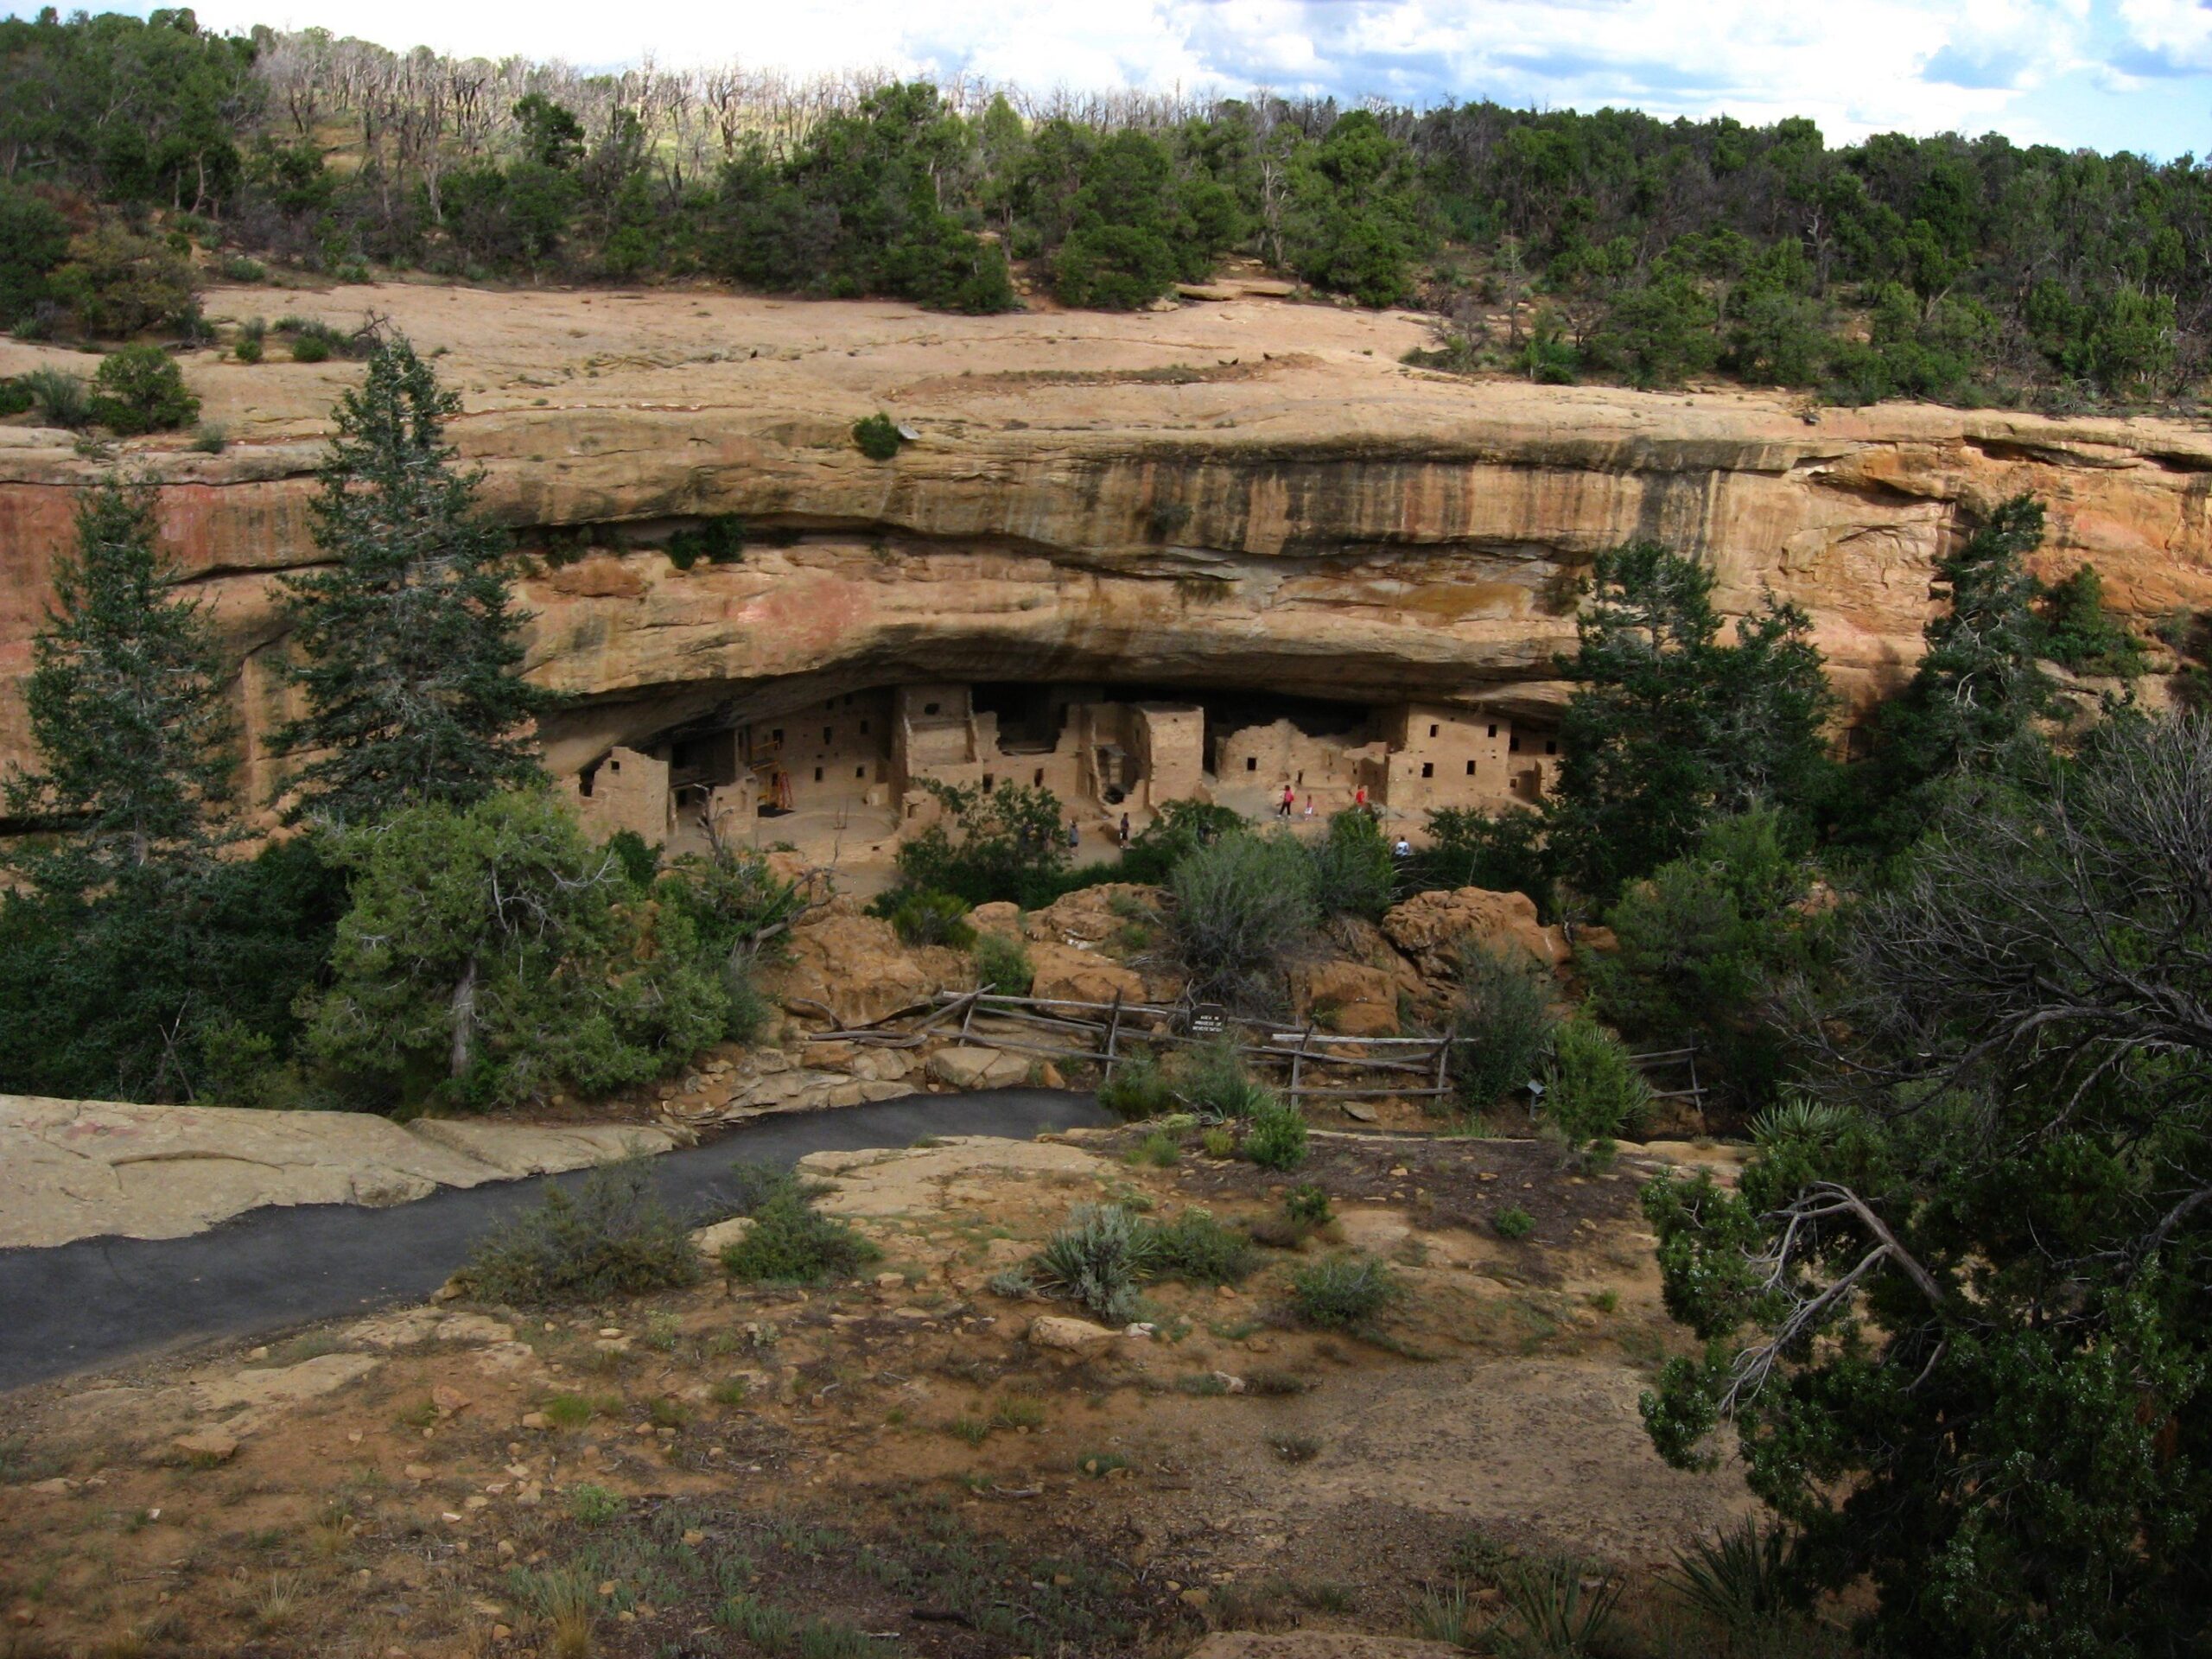 FileFirst View of Spruce Tree House, Mesa Verde National Park